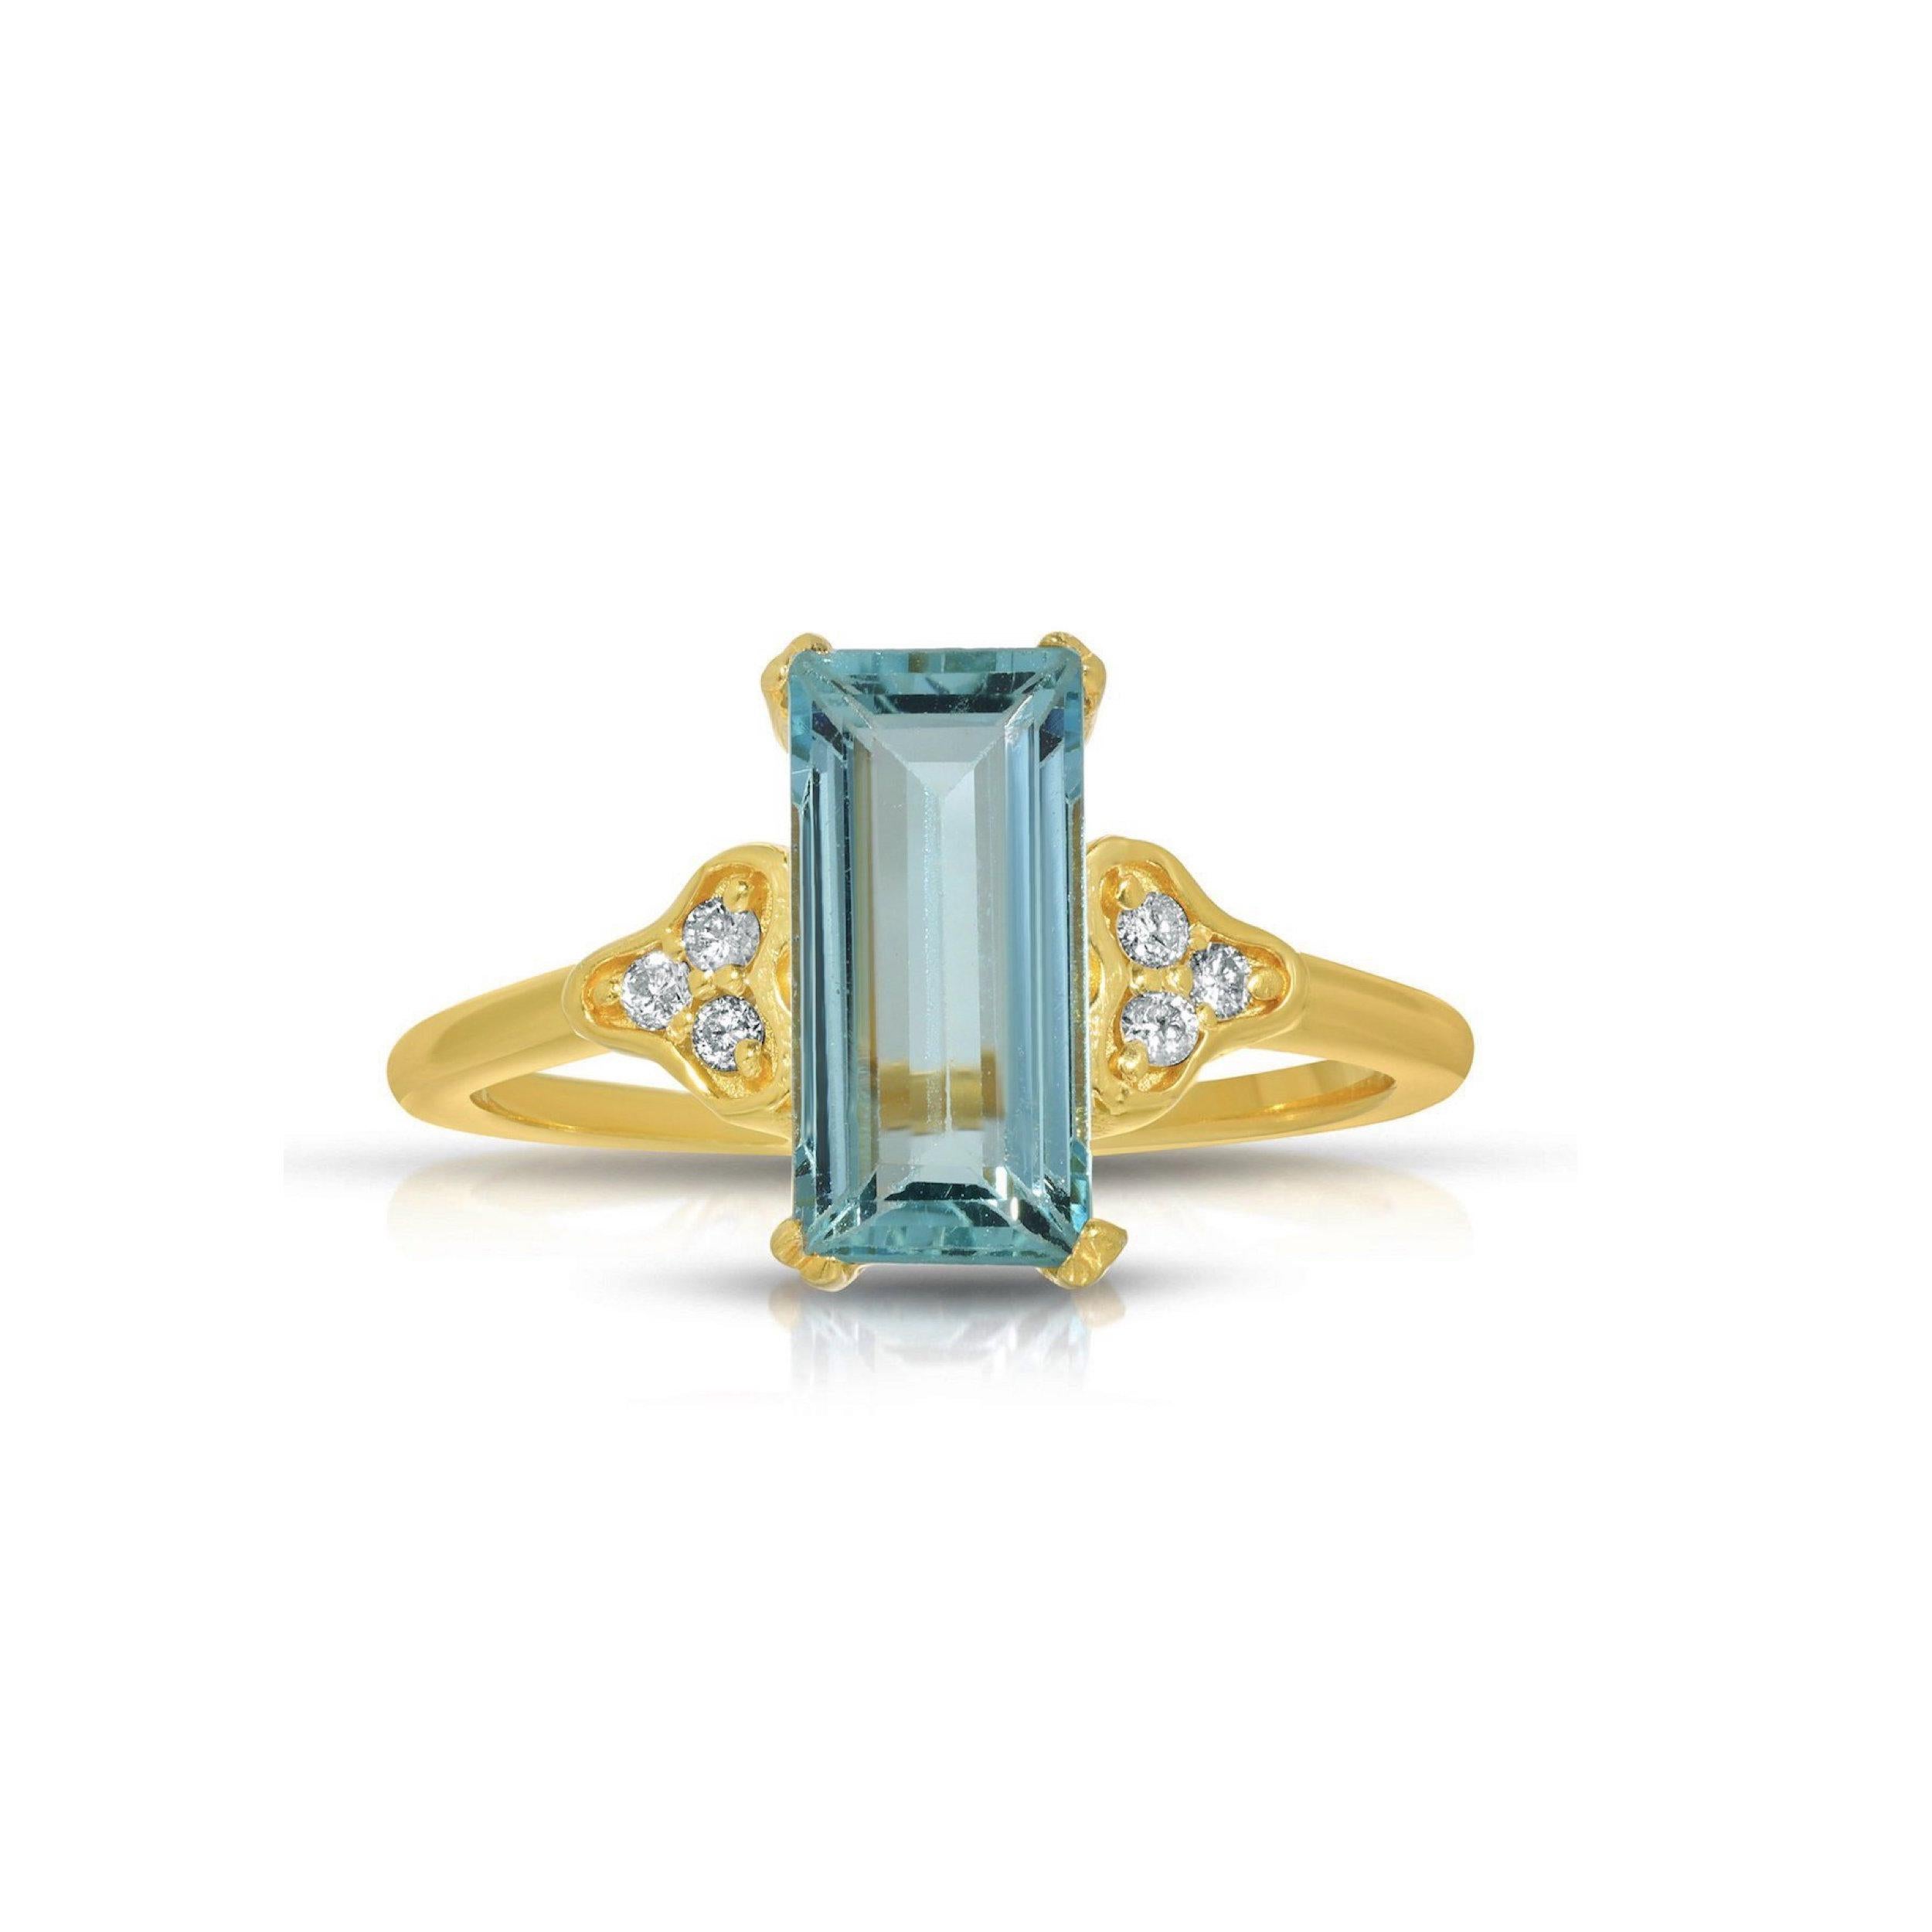 A gorgeous cocktail ring of a contemporary design with Aquamarine and Diamonds. This beautiful ring features a 2.50 Carats Emerald Cut Aquamarine centered by .08 Carats of sparkling White Diamonds. This ring is set in stylish 22 Karat Gold overlay